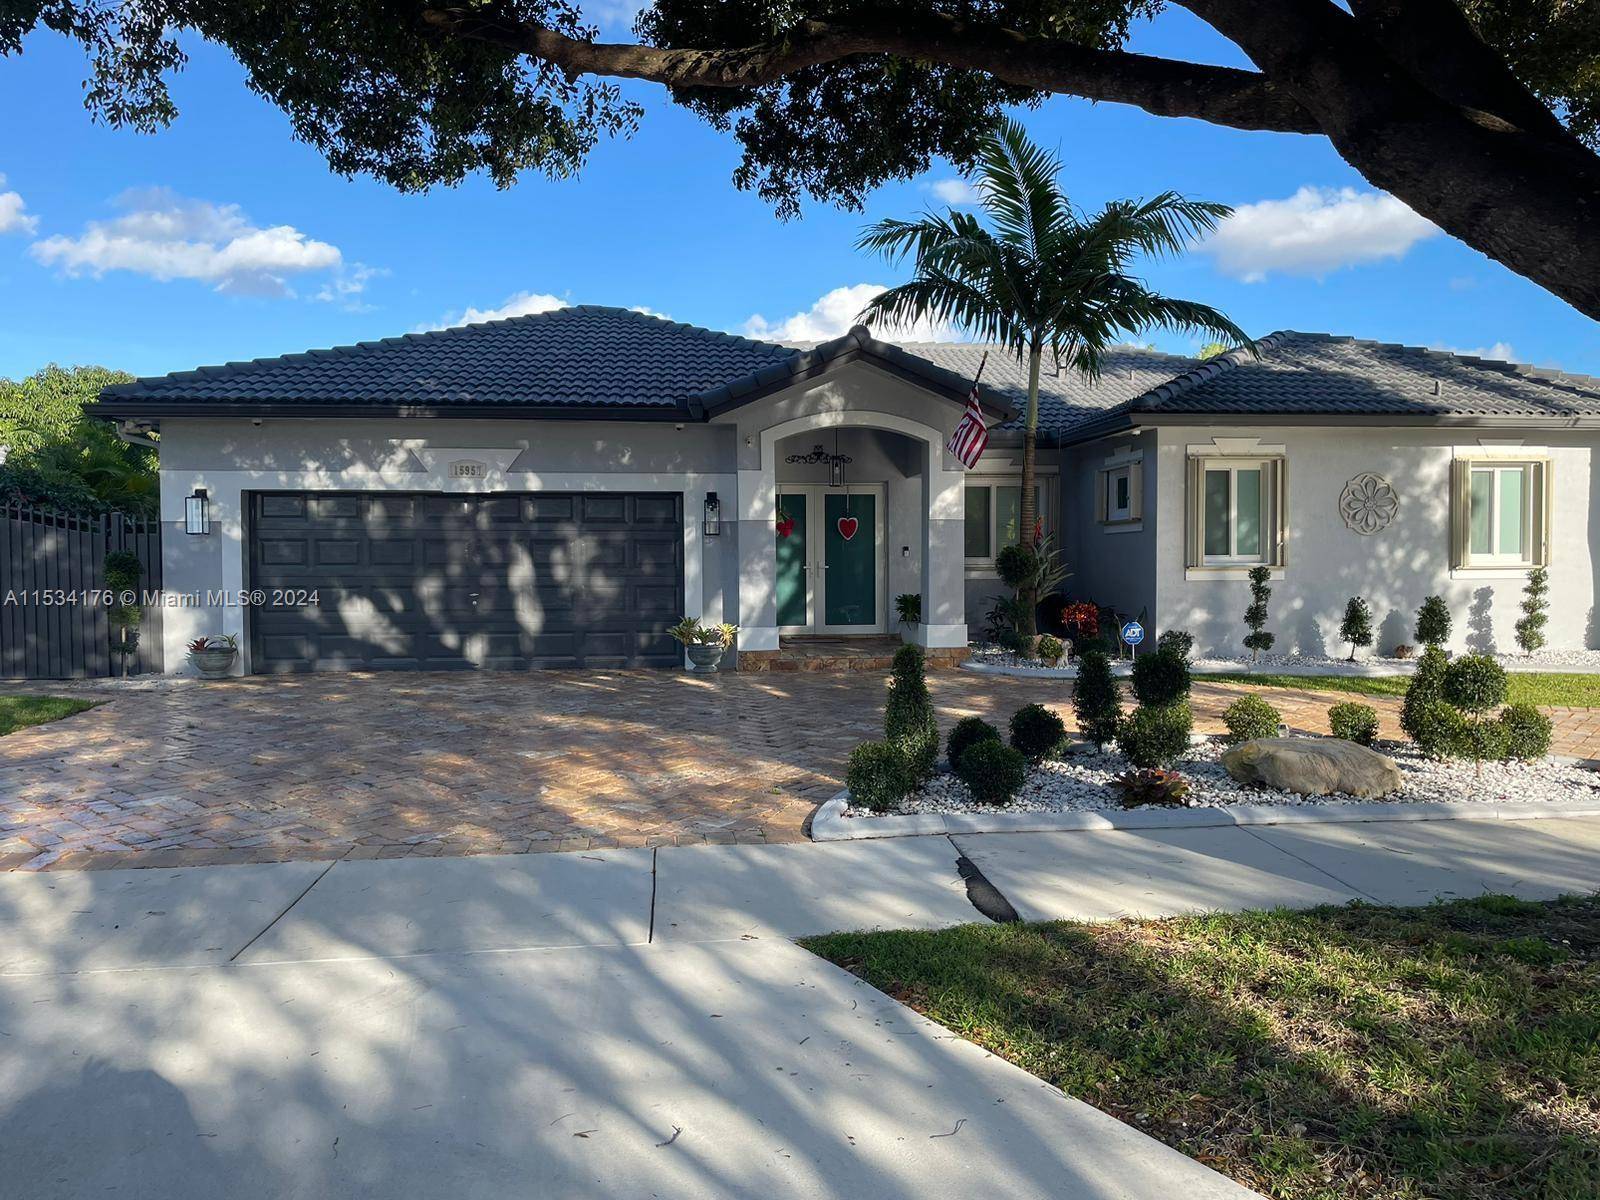 Beautiful house in Miami Lakes, nice travertine circular driveway, brand new approaches, fully guttered, pretty landscape, impact doors, and windows, accordeon shutters, vaulted ceilings, tile floors, wood floors in all ...